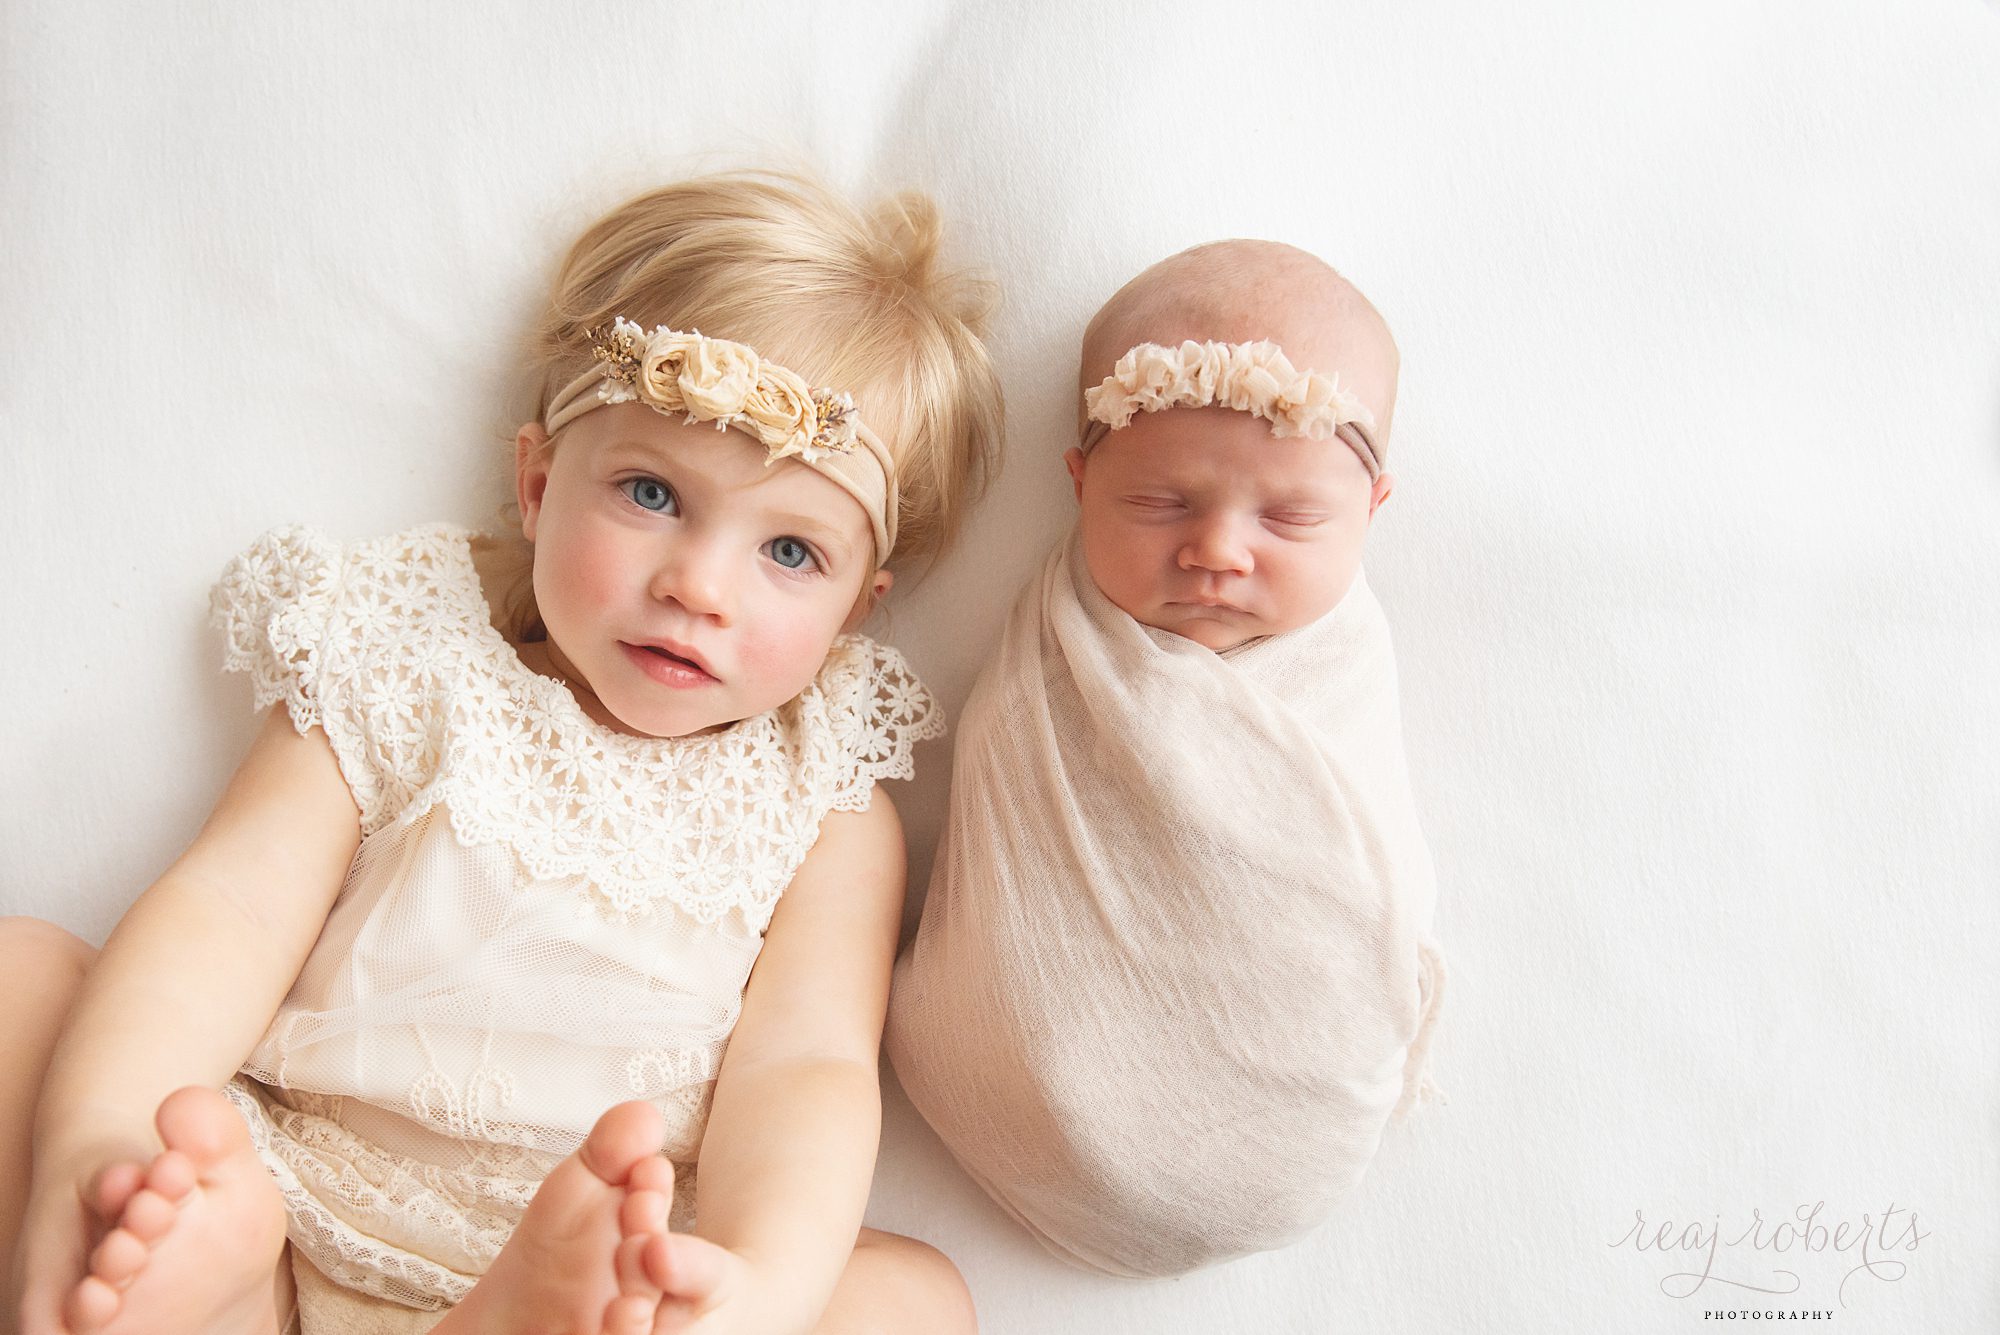 Newborn with sibling photography | Reaj Roberts Photography